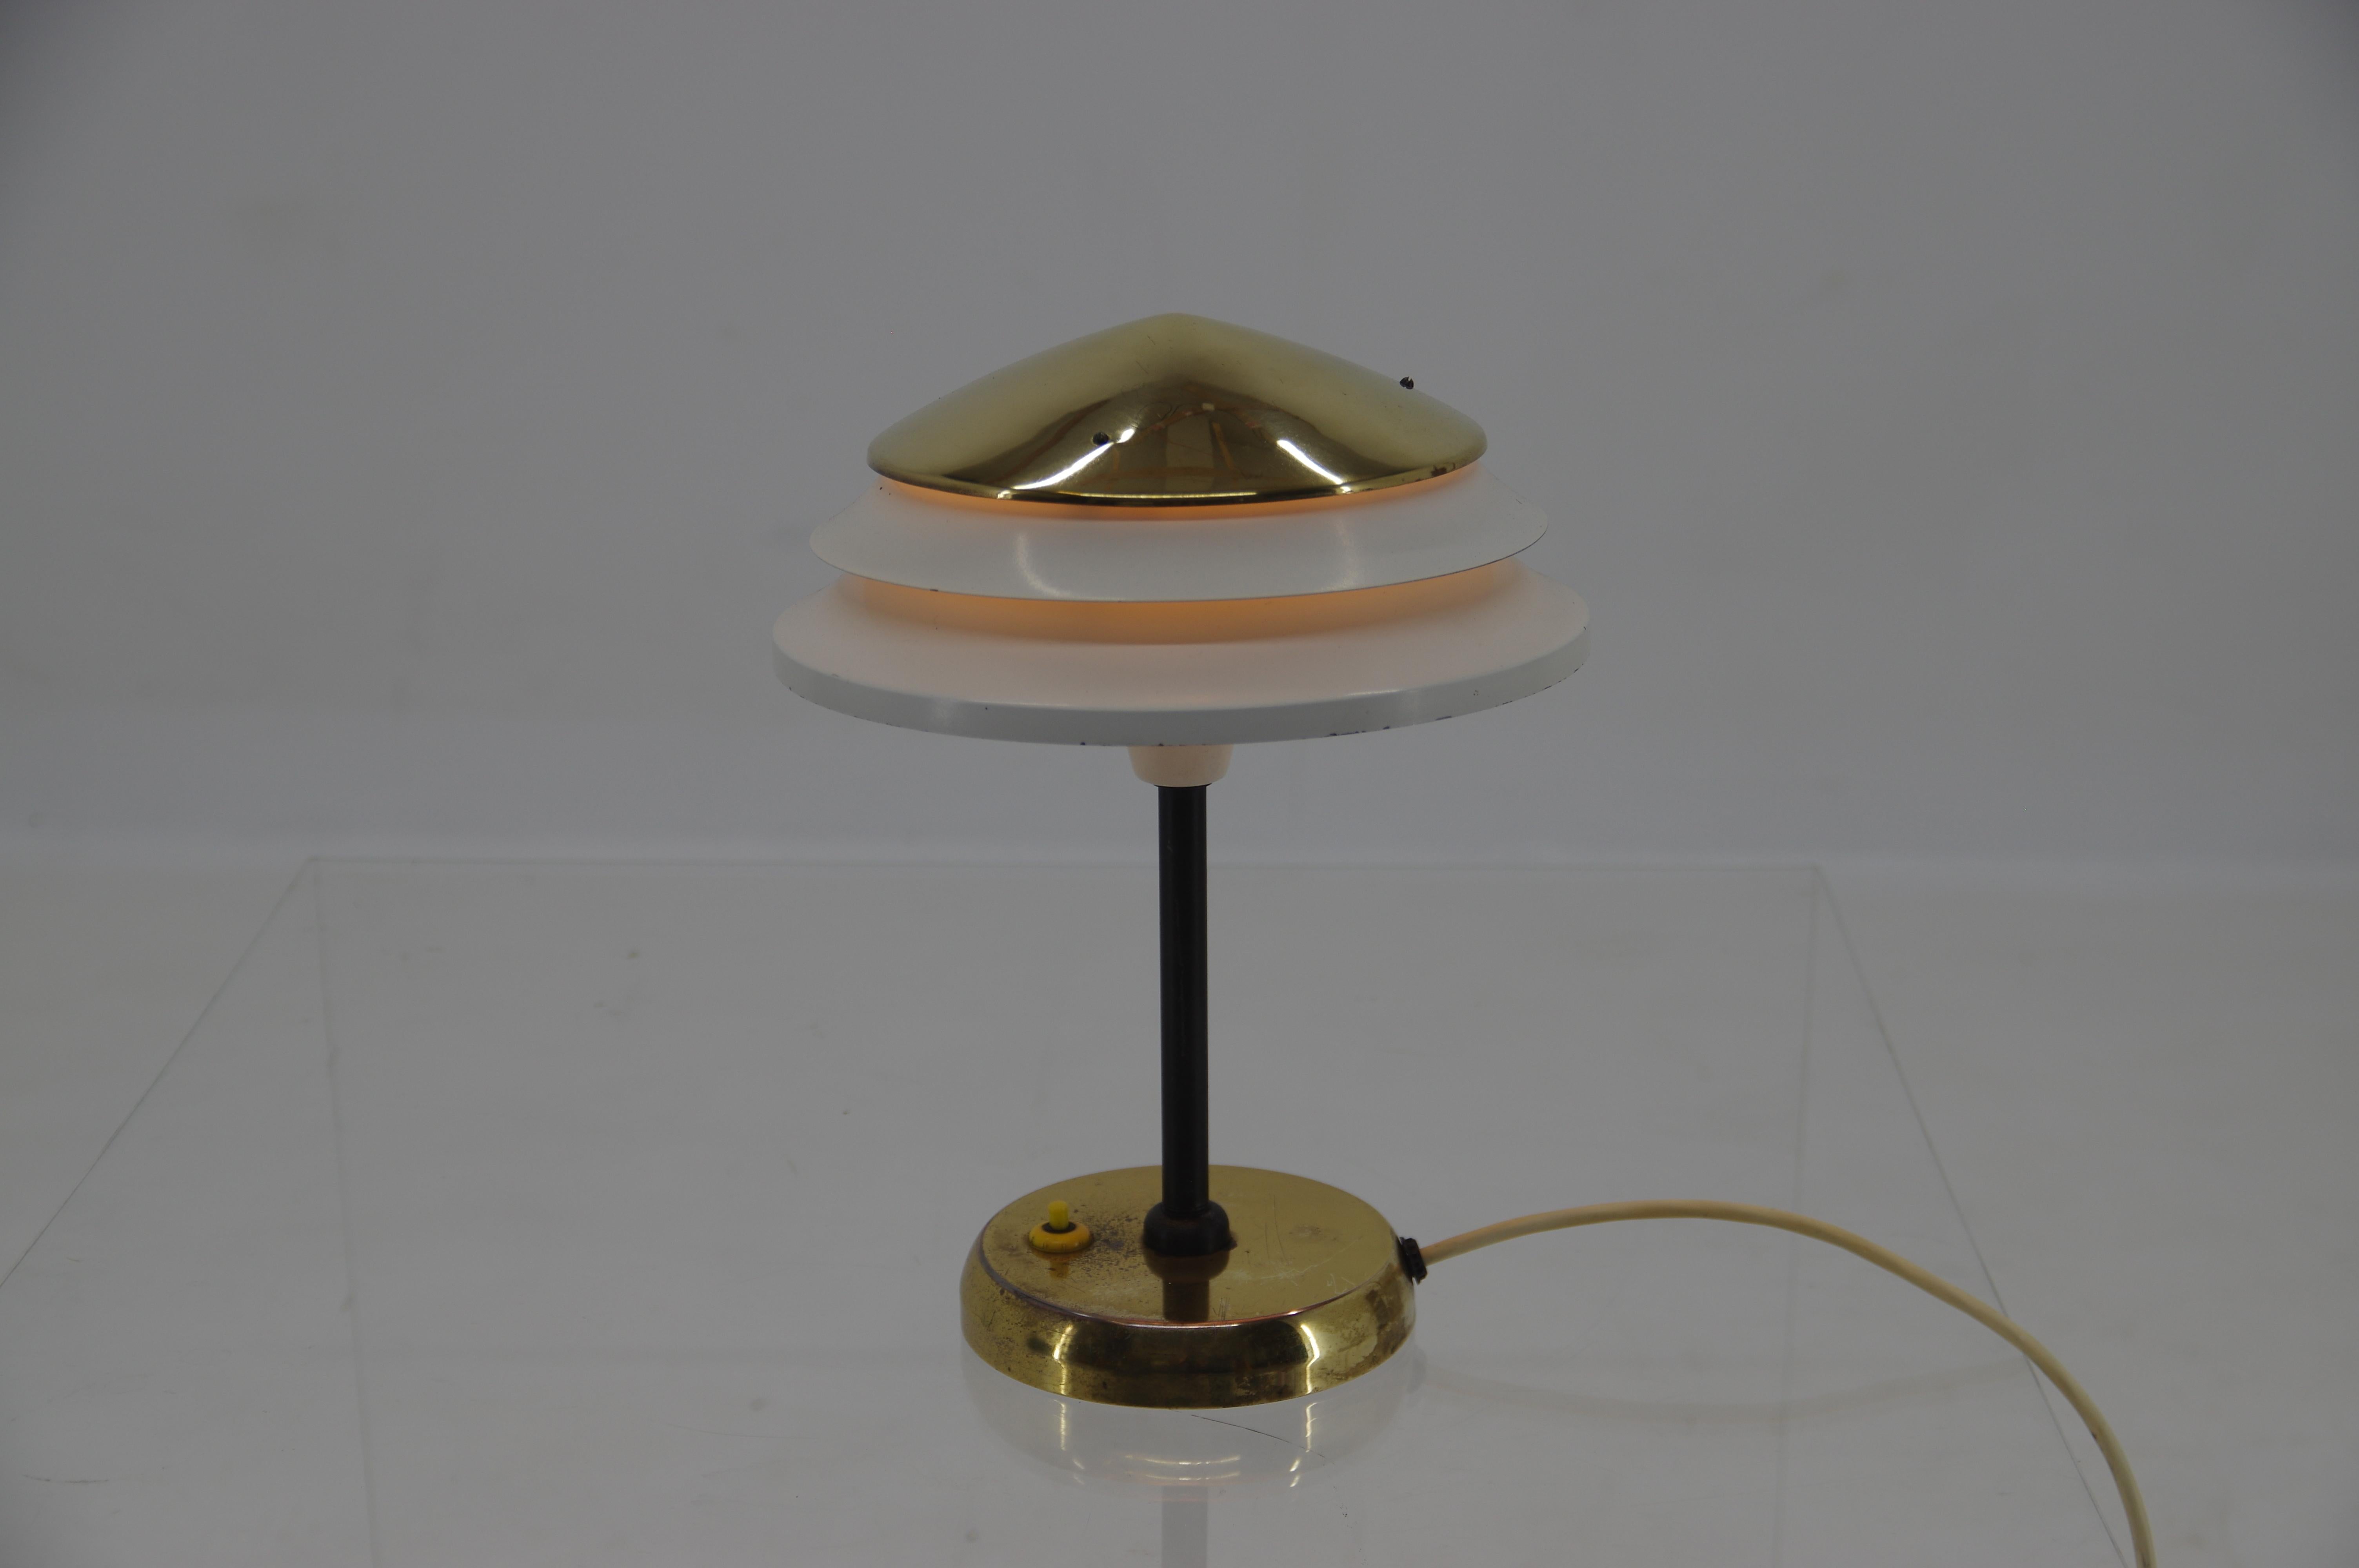 Art Deco brass and white lacquered metal table lamp produced by Zukov, type 6643, Czechoslovakia, circa 1950s. Polished. Nice patina.
max 60W, E27 or E26 socket.
US plug adapter included 